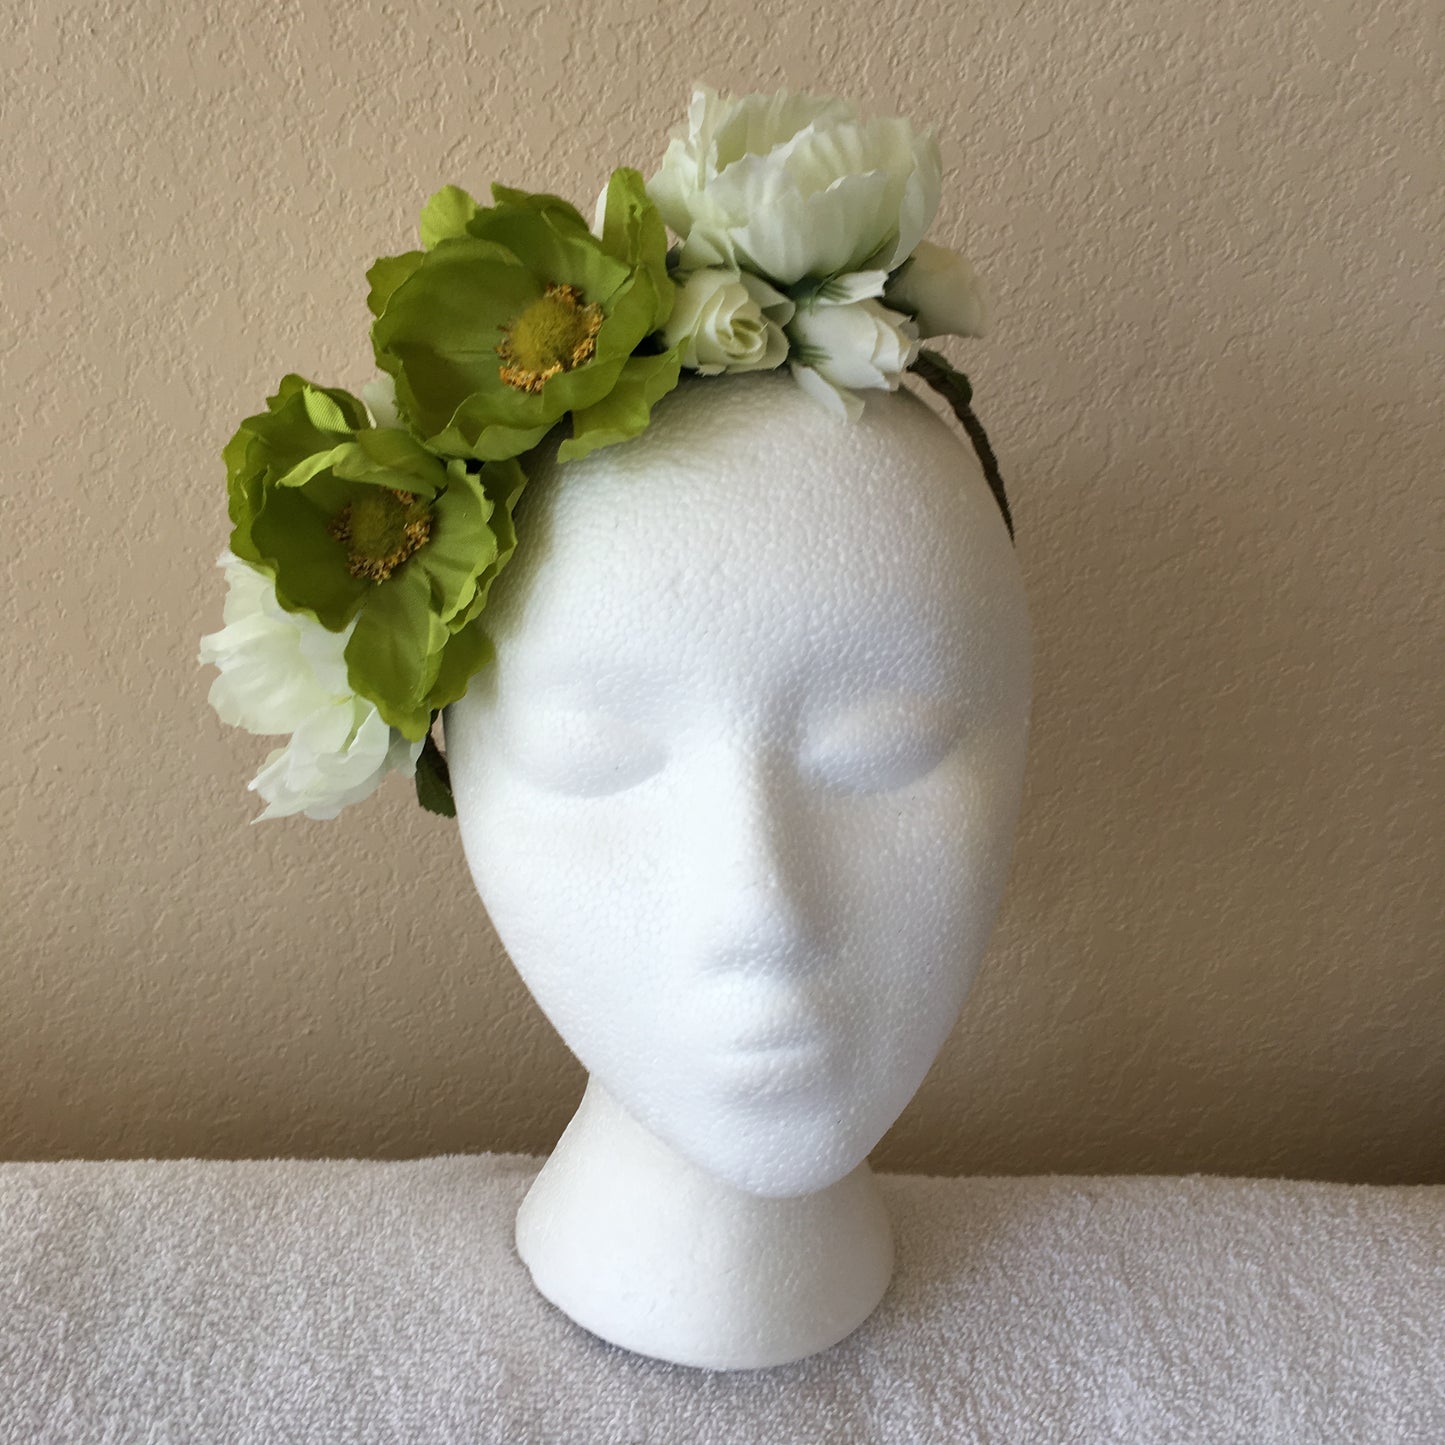 Side Wreath - Light green & pale green w/ white roses accents